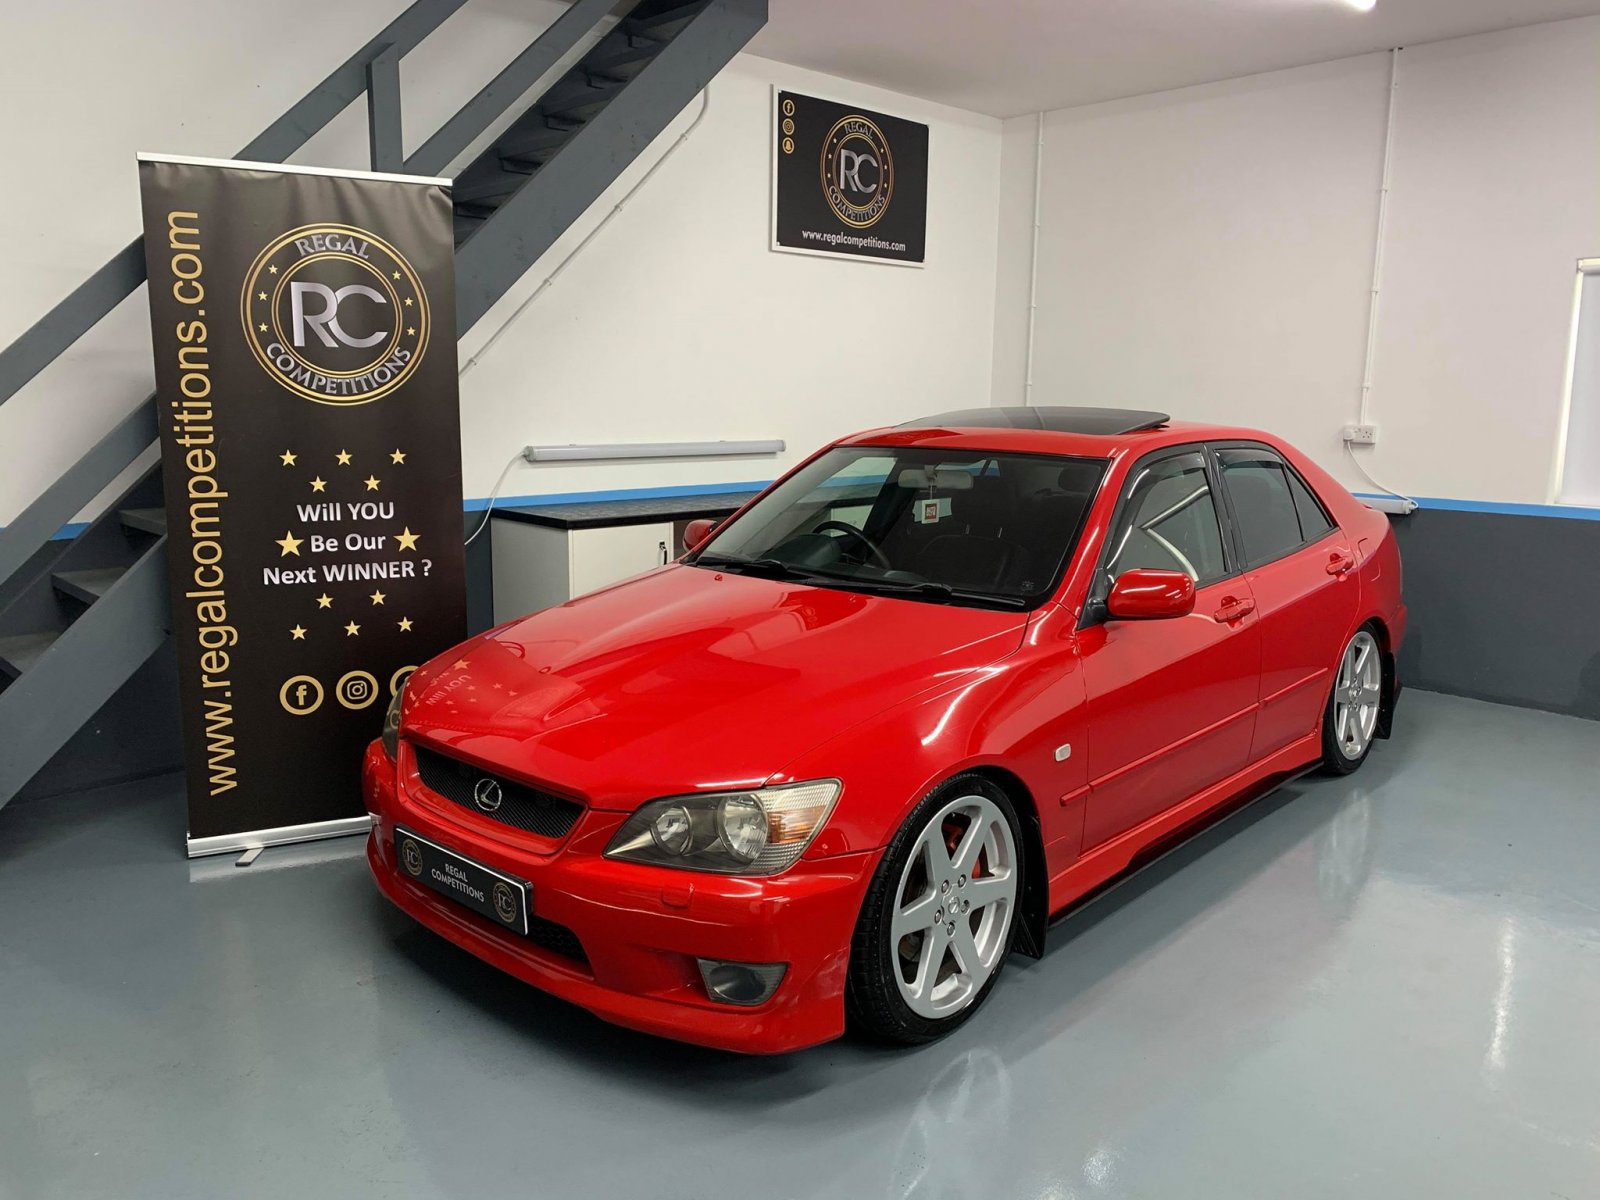 2005 RED LEXUS IS200 SPORT FULLY KITTED! RMS Motoring Forum